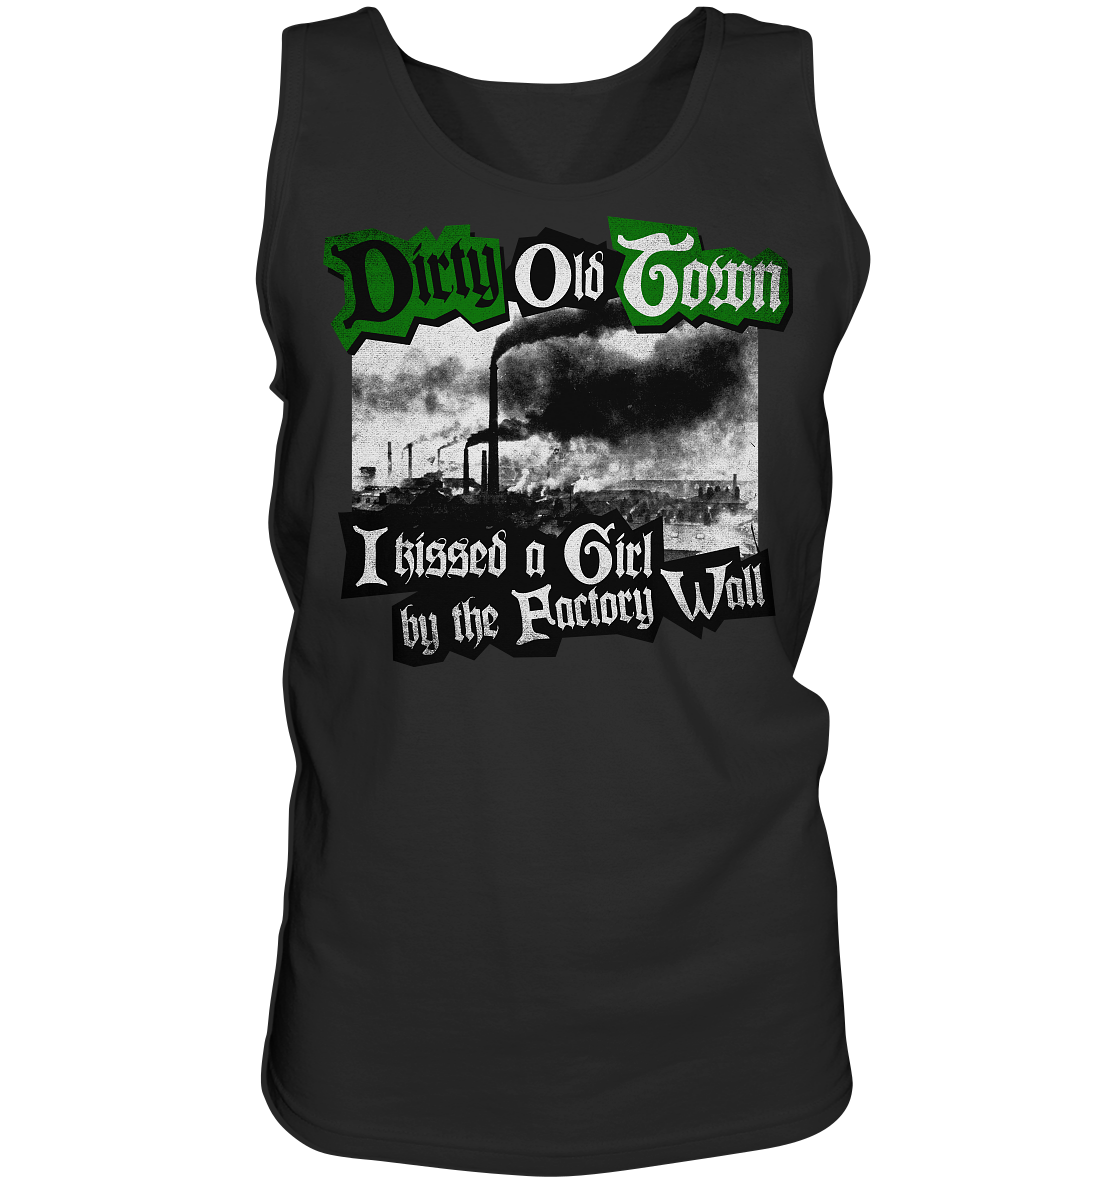 "Dirty Old Town" - Tank-Top